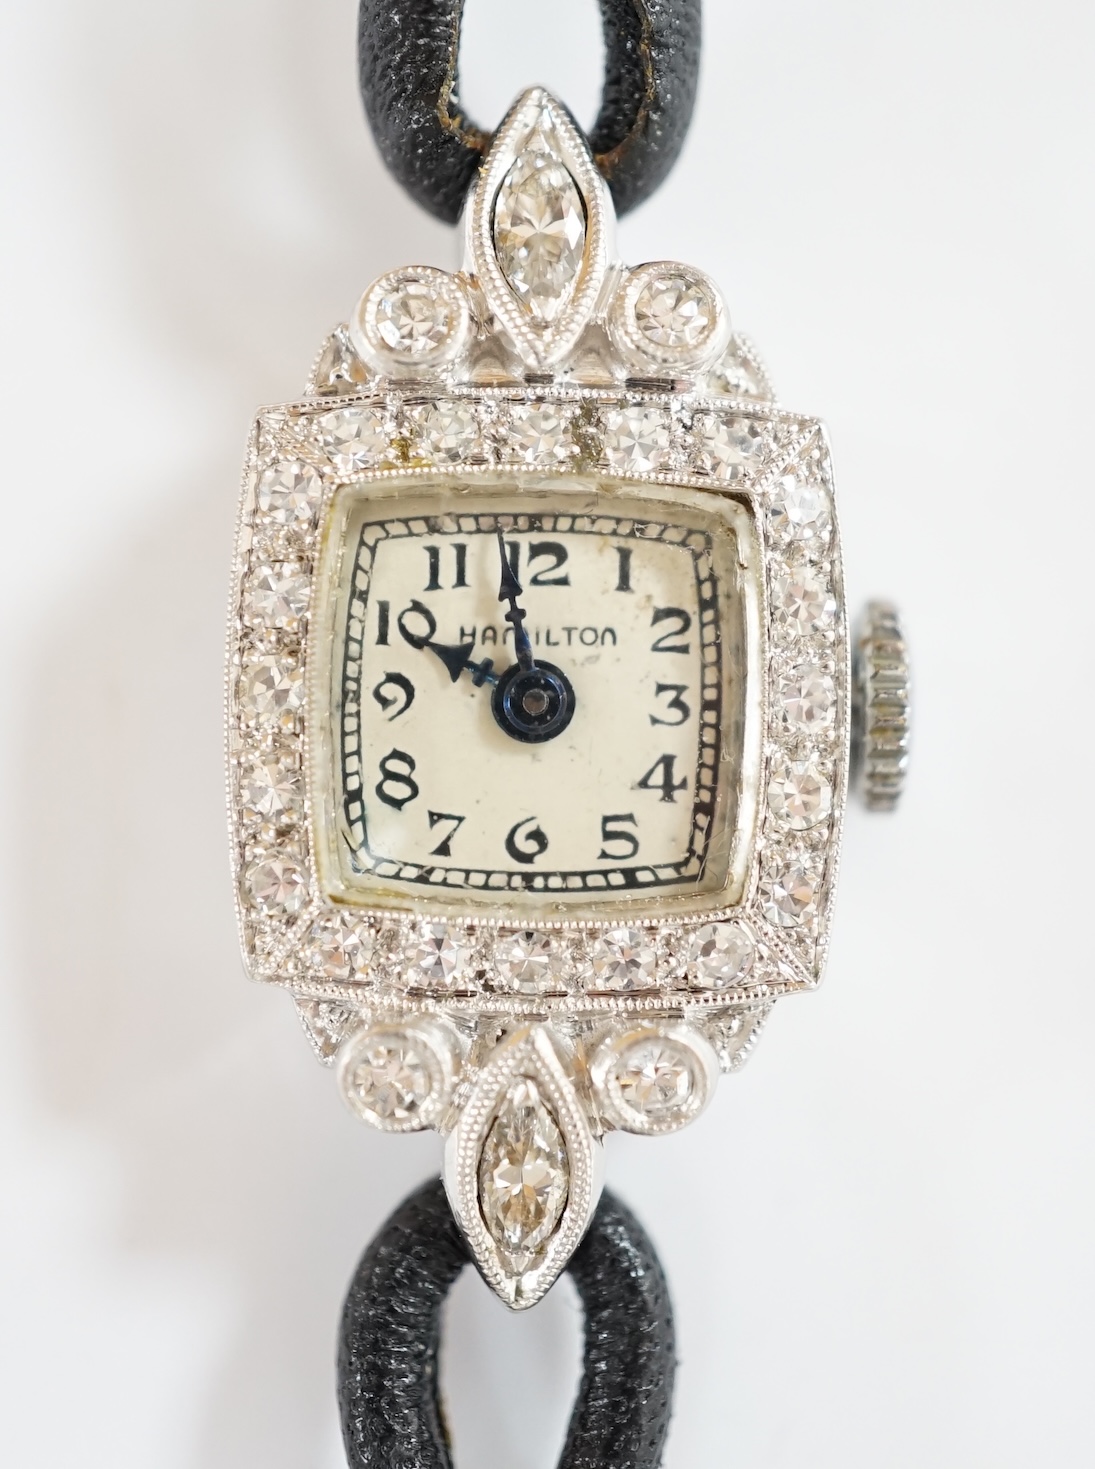 A lady's white metal (engraved plat irid 10%) and diamond set Hamilton manual wind cocktail watch, on a twin fabric strap. Condition - fair